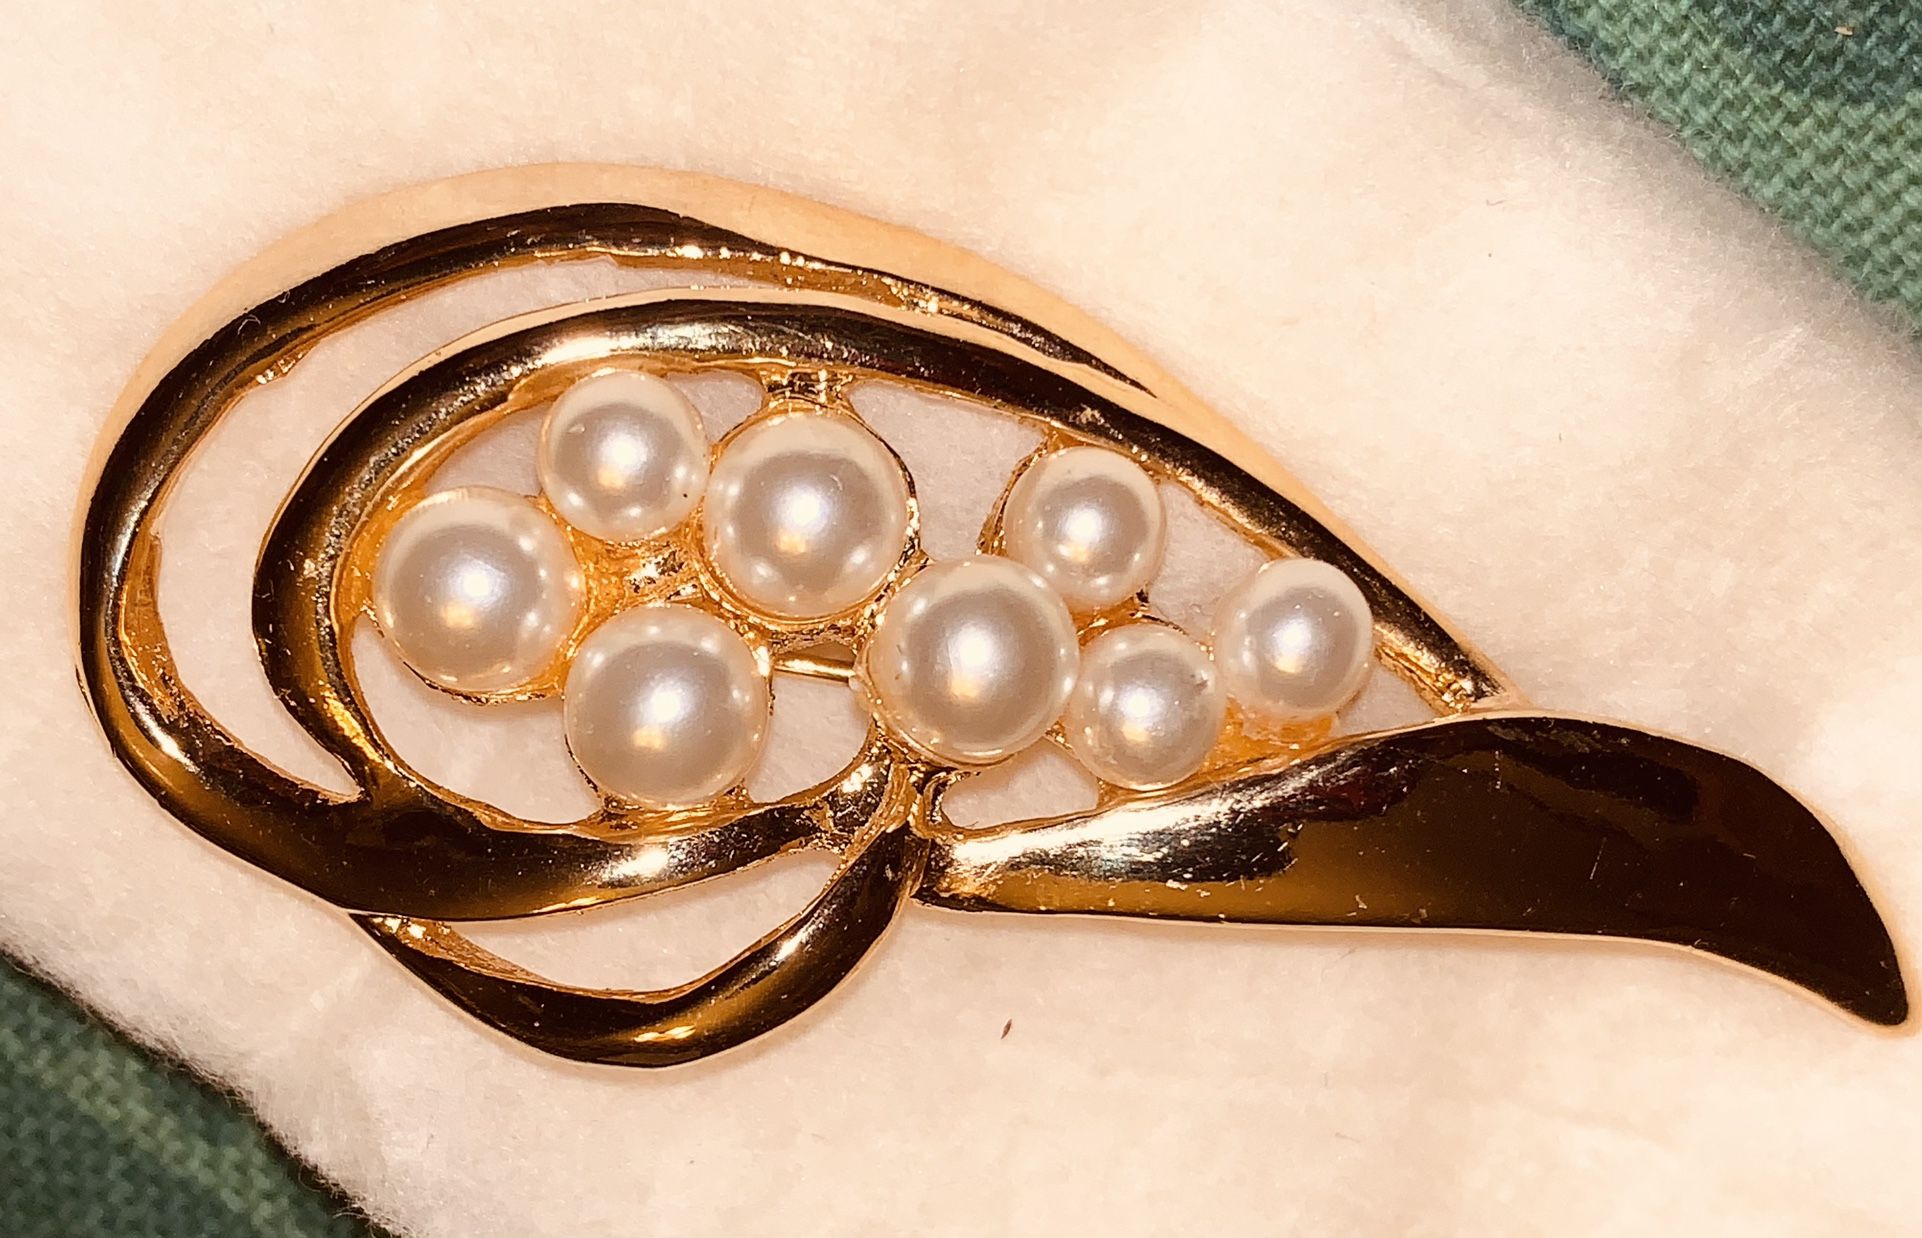 GOLD & PEARL VINTAGE BROOCH Over 2” w/ Safety Lock